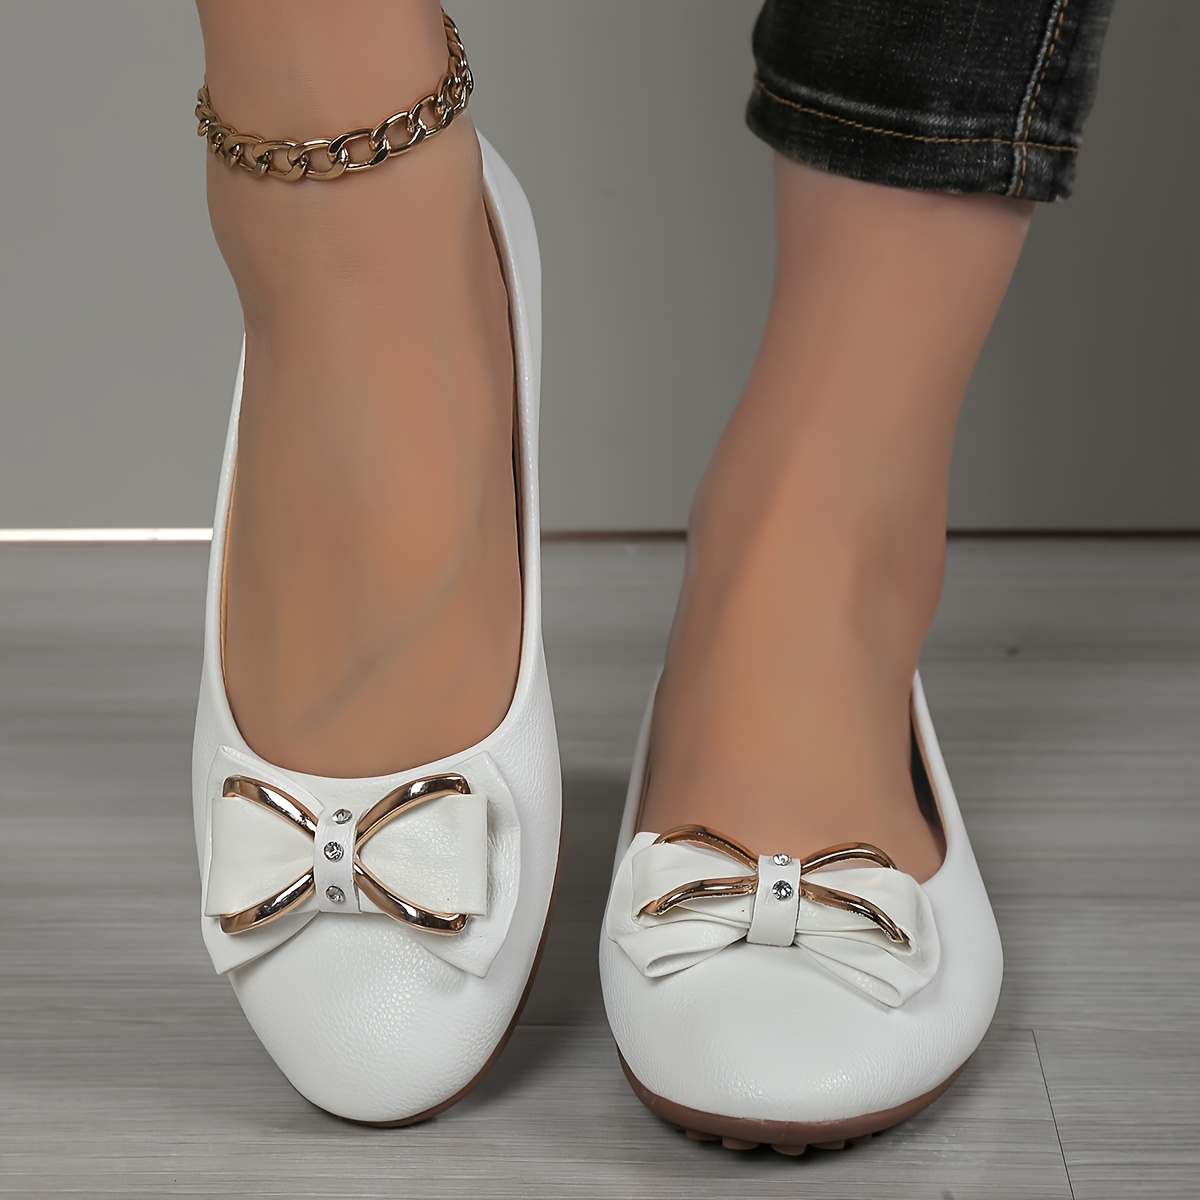 

Women's Casual Flats With Bow & Rhinestone Detail, Round Toe Comfort Ballet Flats, Solid Color Slip On Shoes